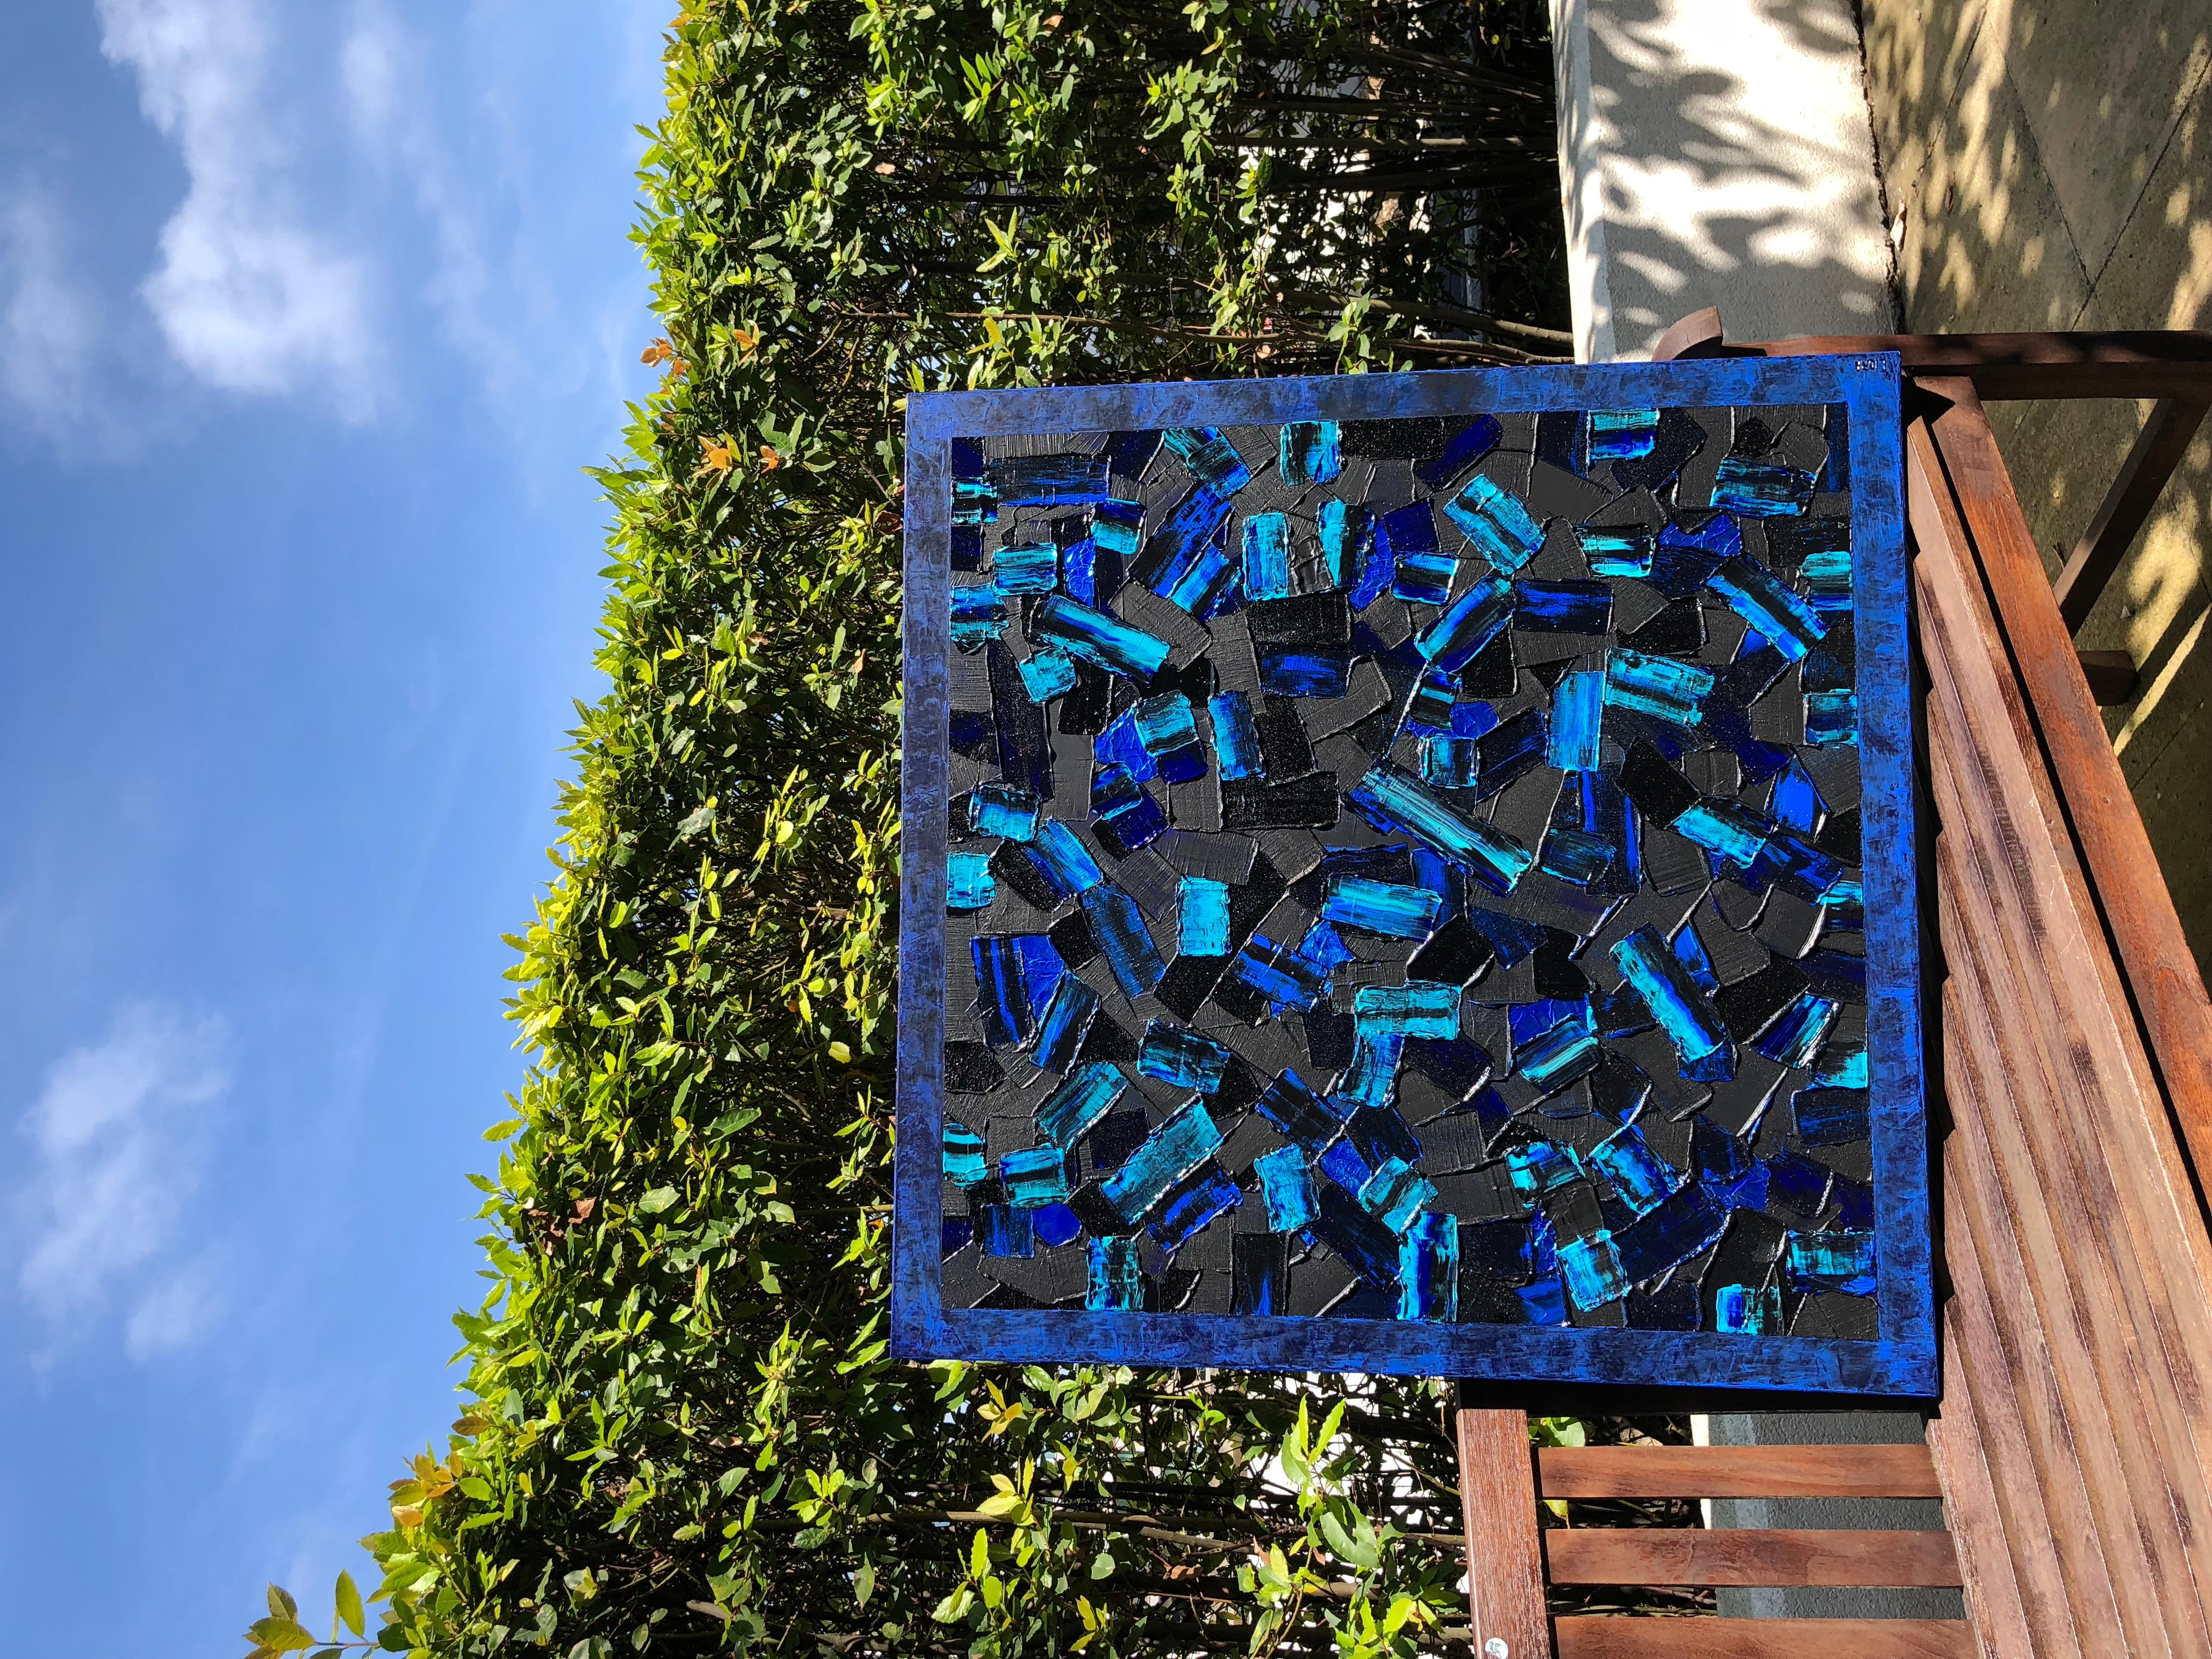 Abstract painting on canvas with heavy texture.
Acrylic and varnish for protection.
Colors: Blue.
This painting is called unfolding departure and numbered 237.
Original and signed by the artist, comes with gallery certificate.